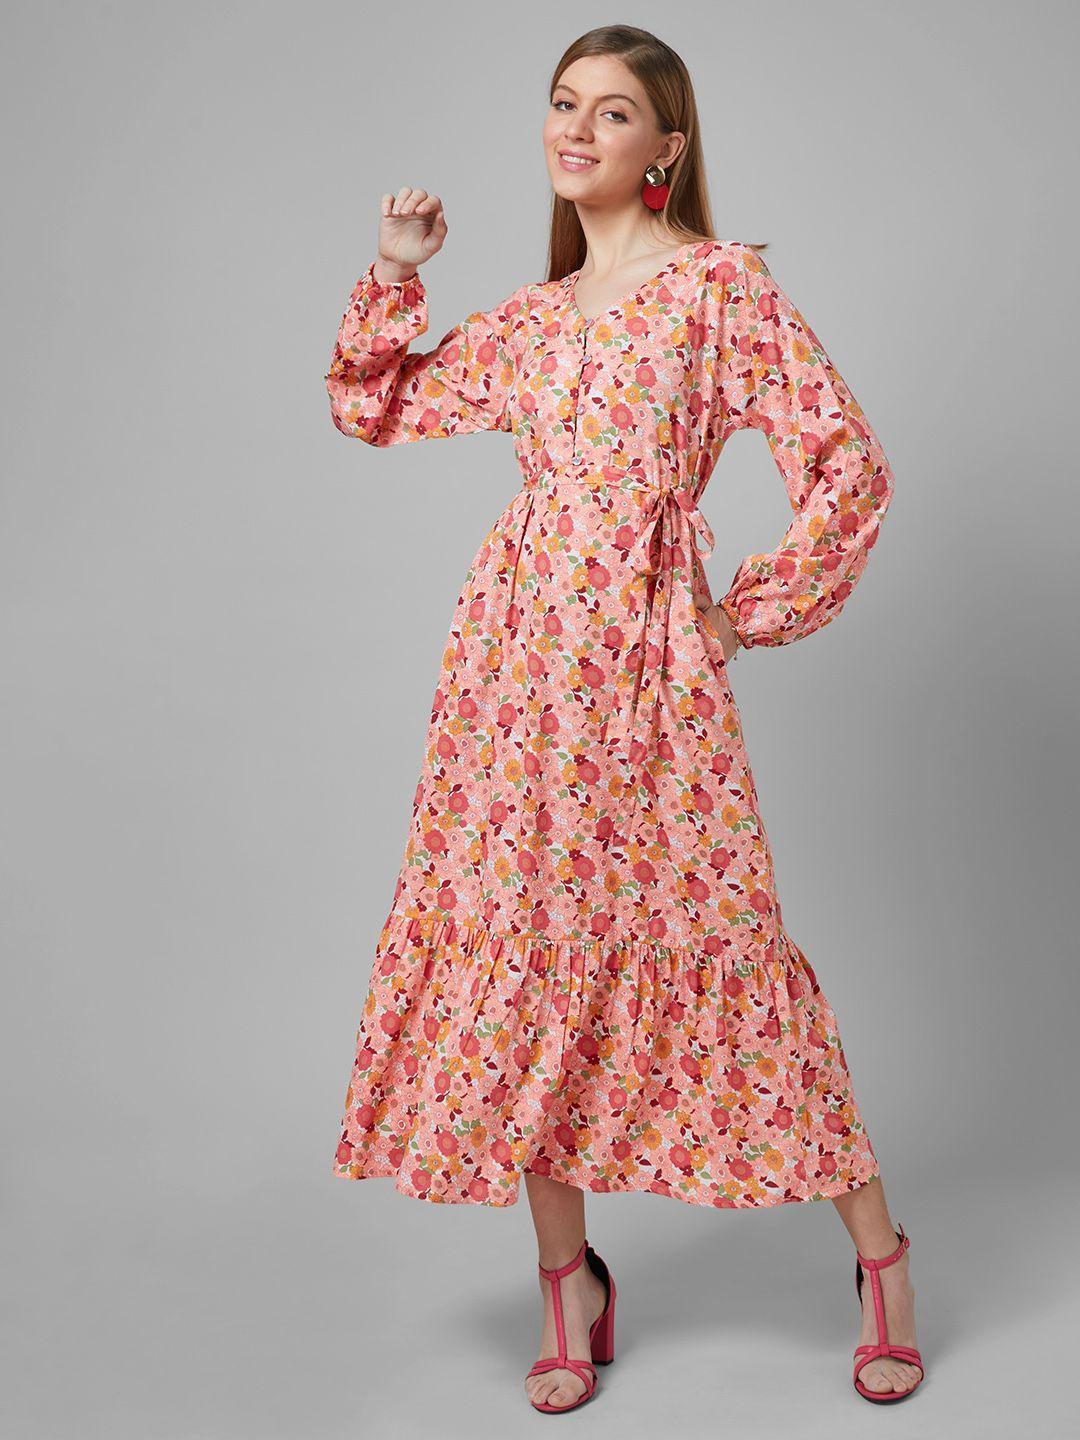 style-quotient-floral-layered-a-line-midi-dress